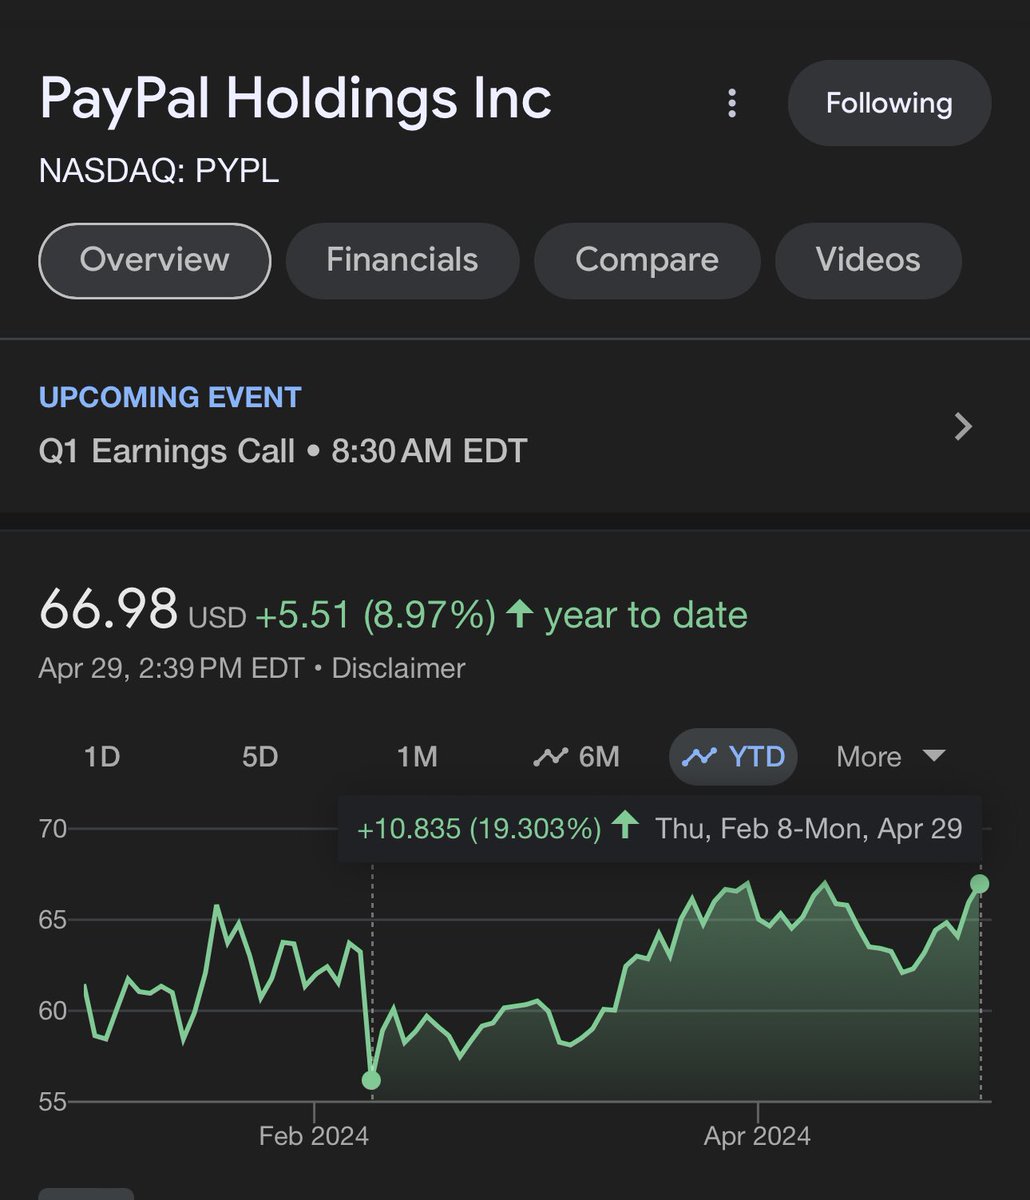 PAYPAL IS NOW UP 20% FROM ITS LAST EARNINGS SELLOFF PAYPAL REPORTS EARNINGS TOMORROW MORNING $PYPL